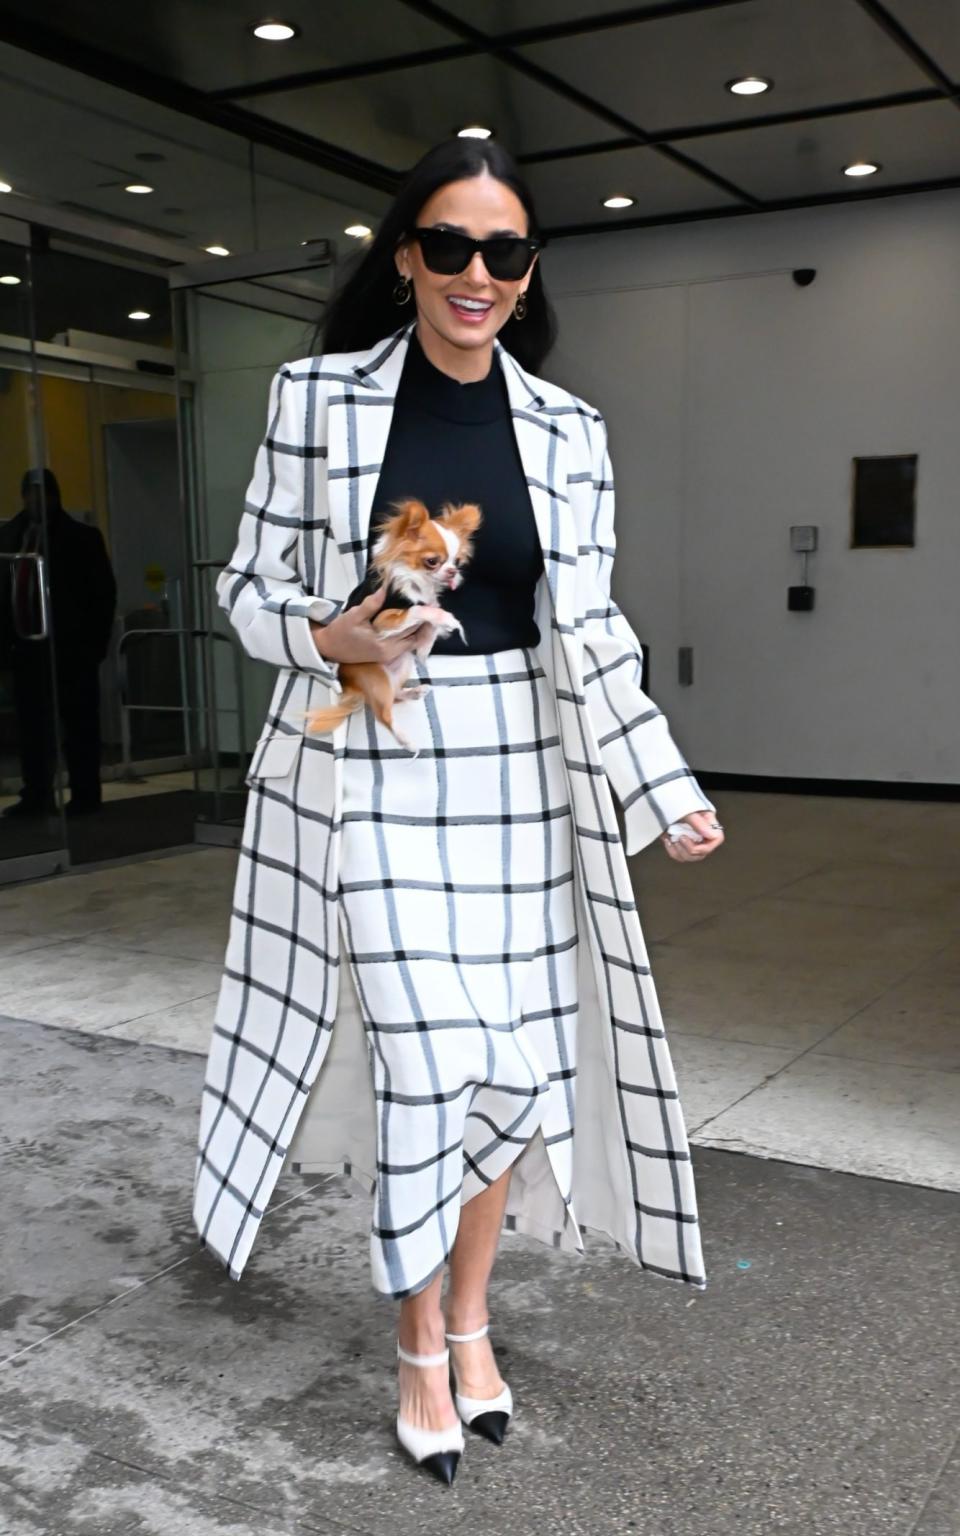 Few looks are complete for Moore without her favorite accessory – her chihuahua, Pilaf